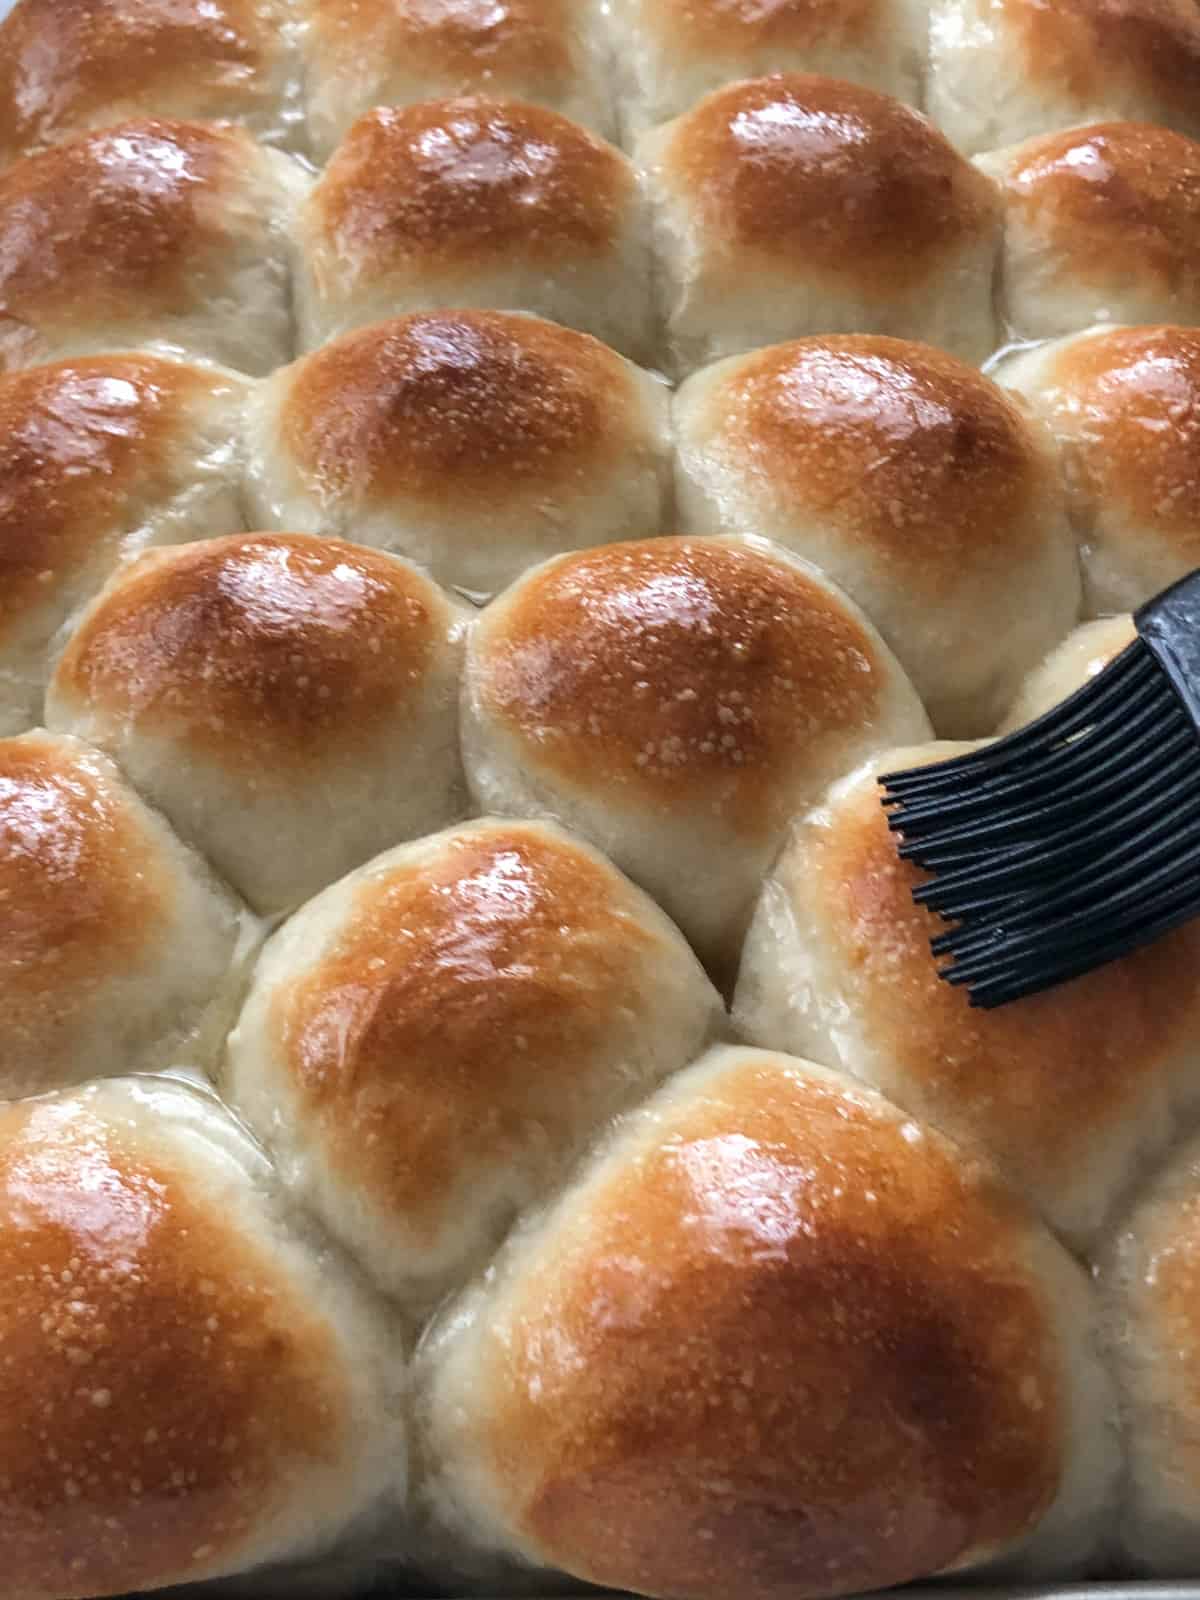 Homemade dinner rolls being brushed with butter.